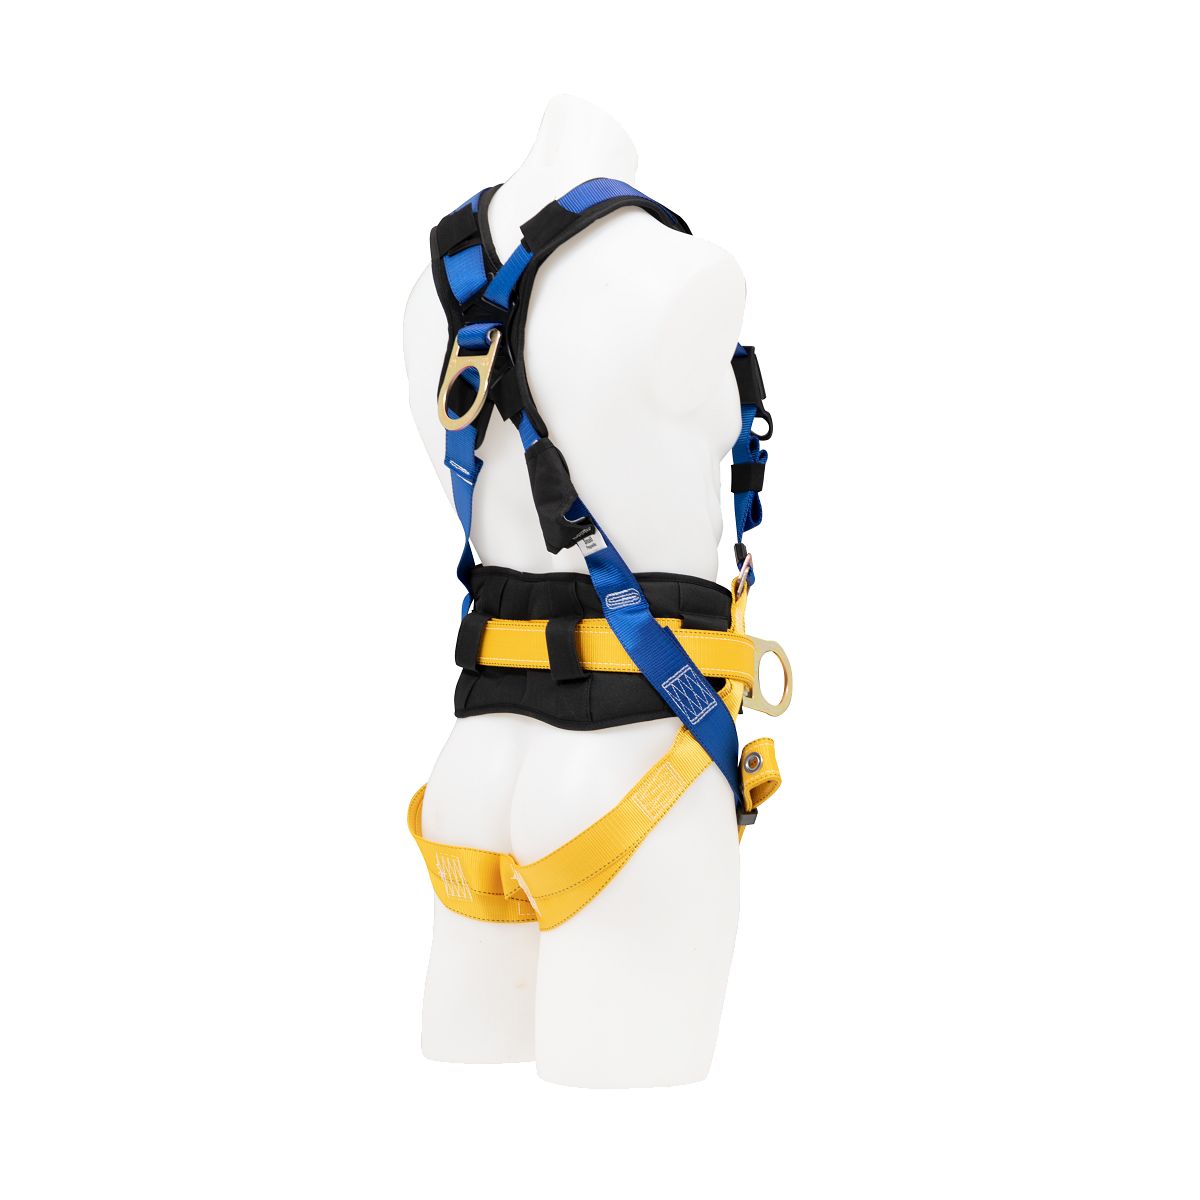 Werner BaseWear Construction Harness from GME Supply